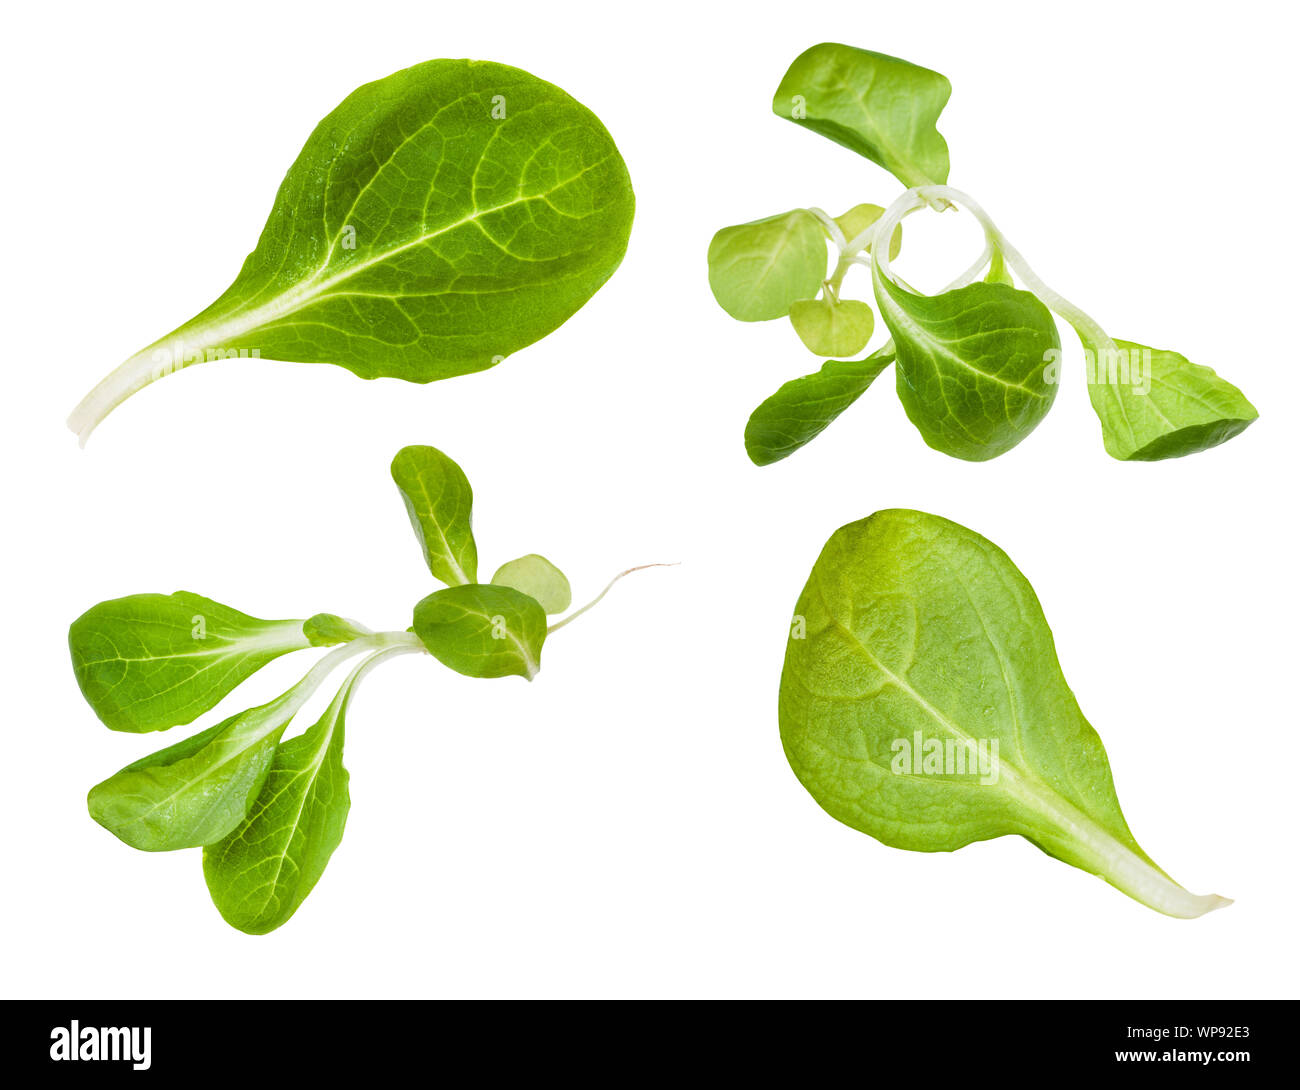 various leaves and twigs of mache (valerianella locusta) plant isolated on white background Stock Photo